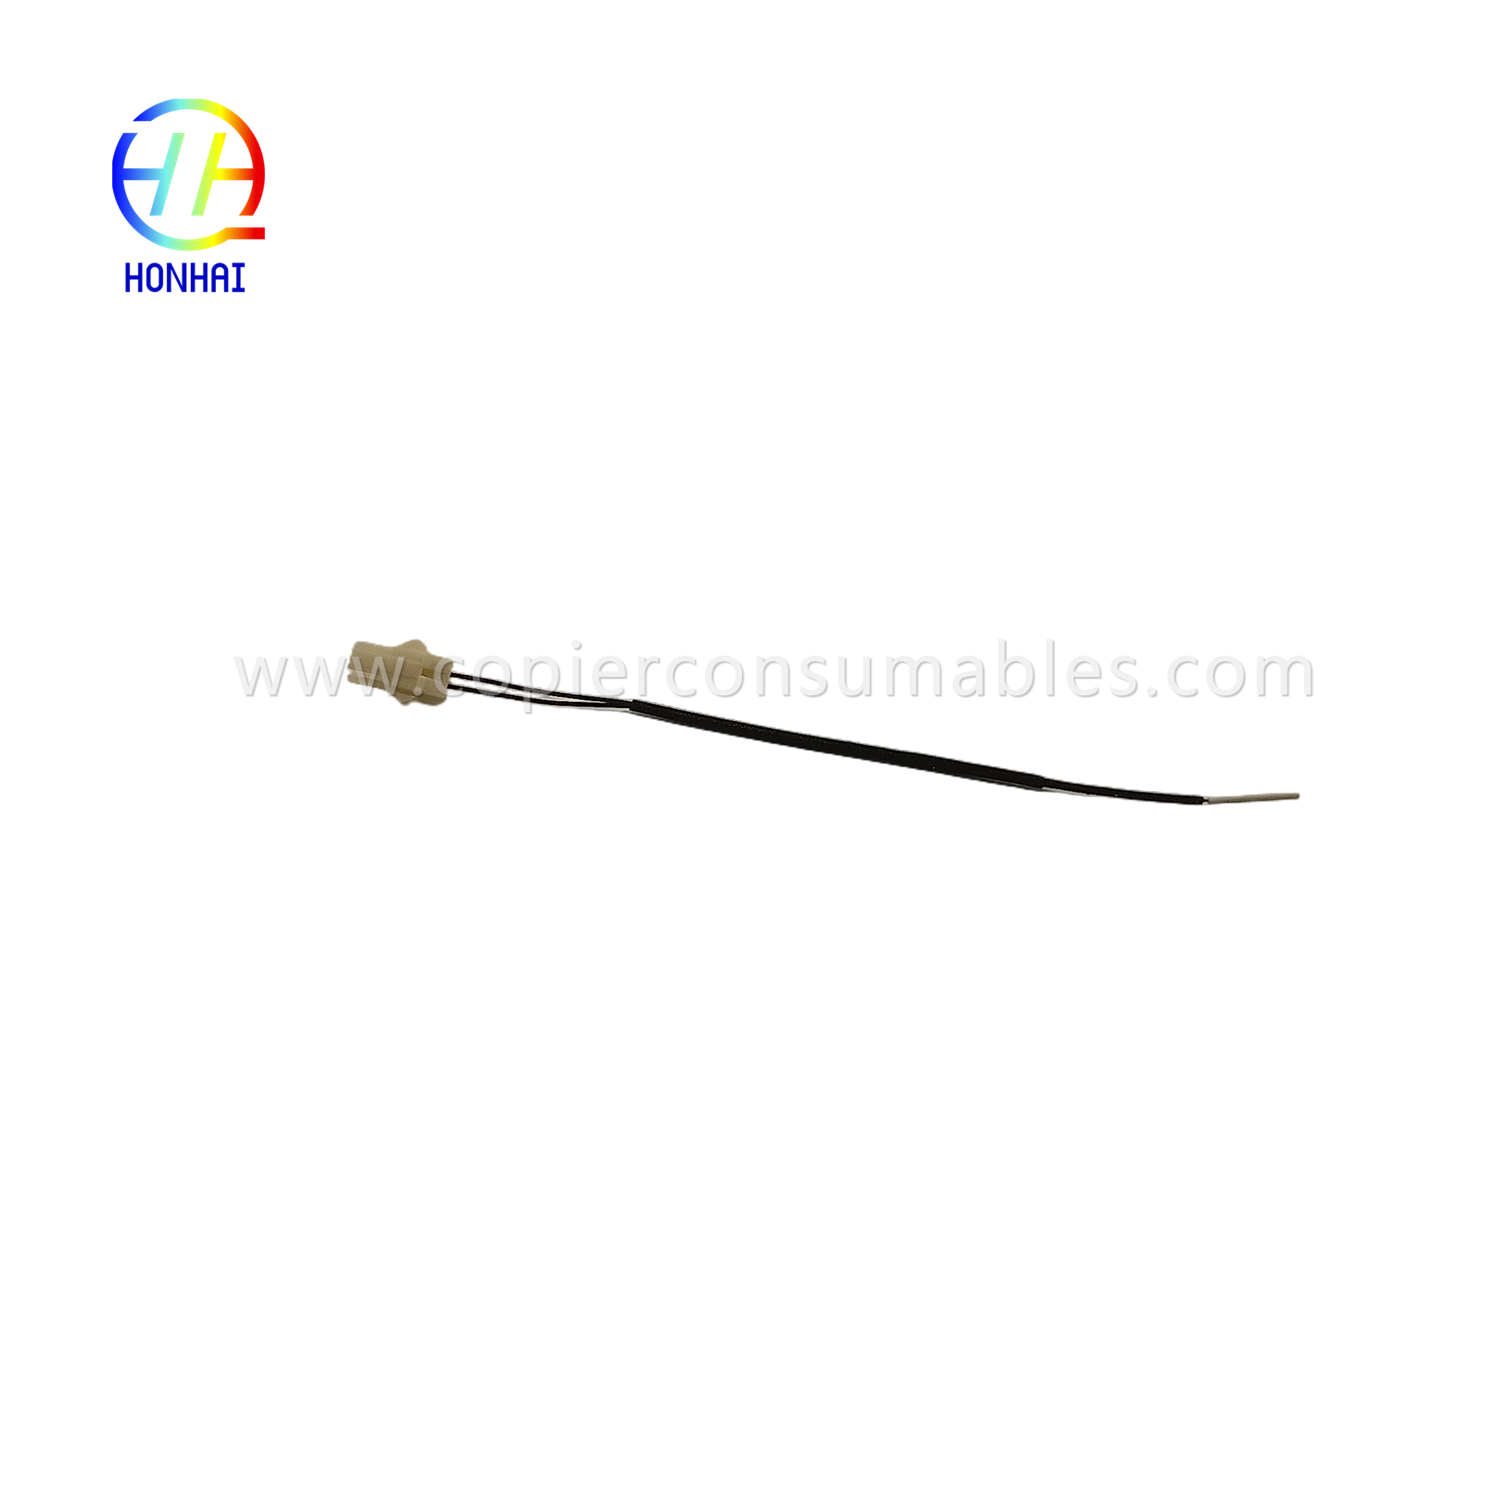 https://www.copierconsumables.com/fuser-thermistor-for-oce-9400-tds300-tds750pw300350-ምርት/